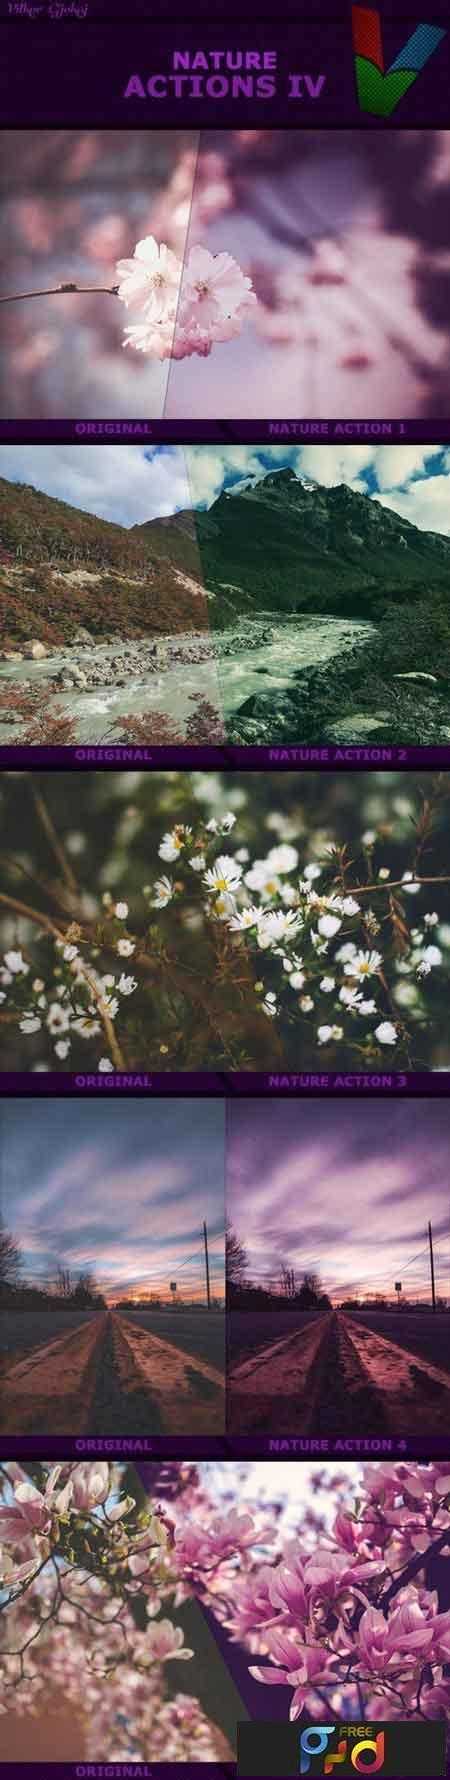 Nature Actions IV